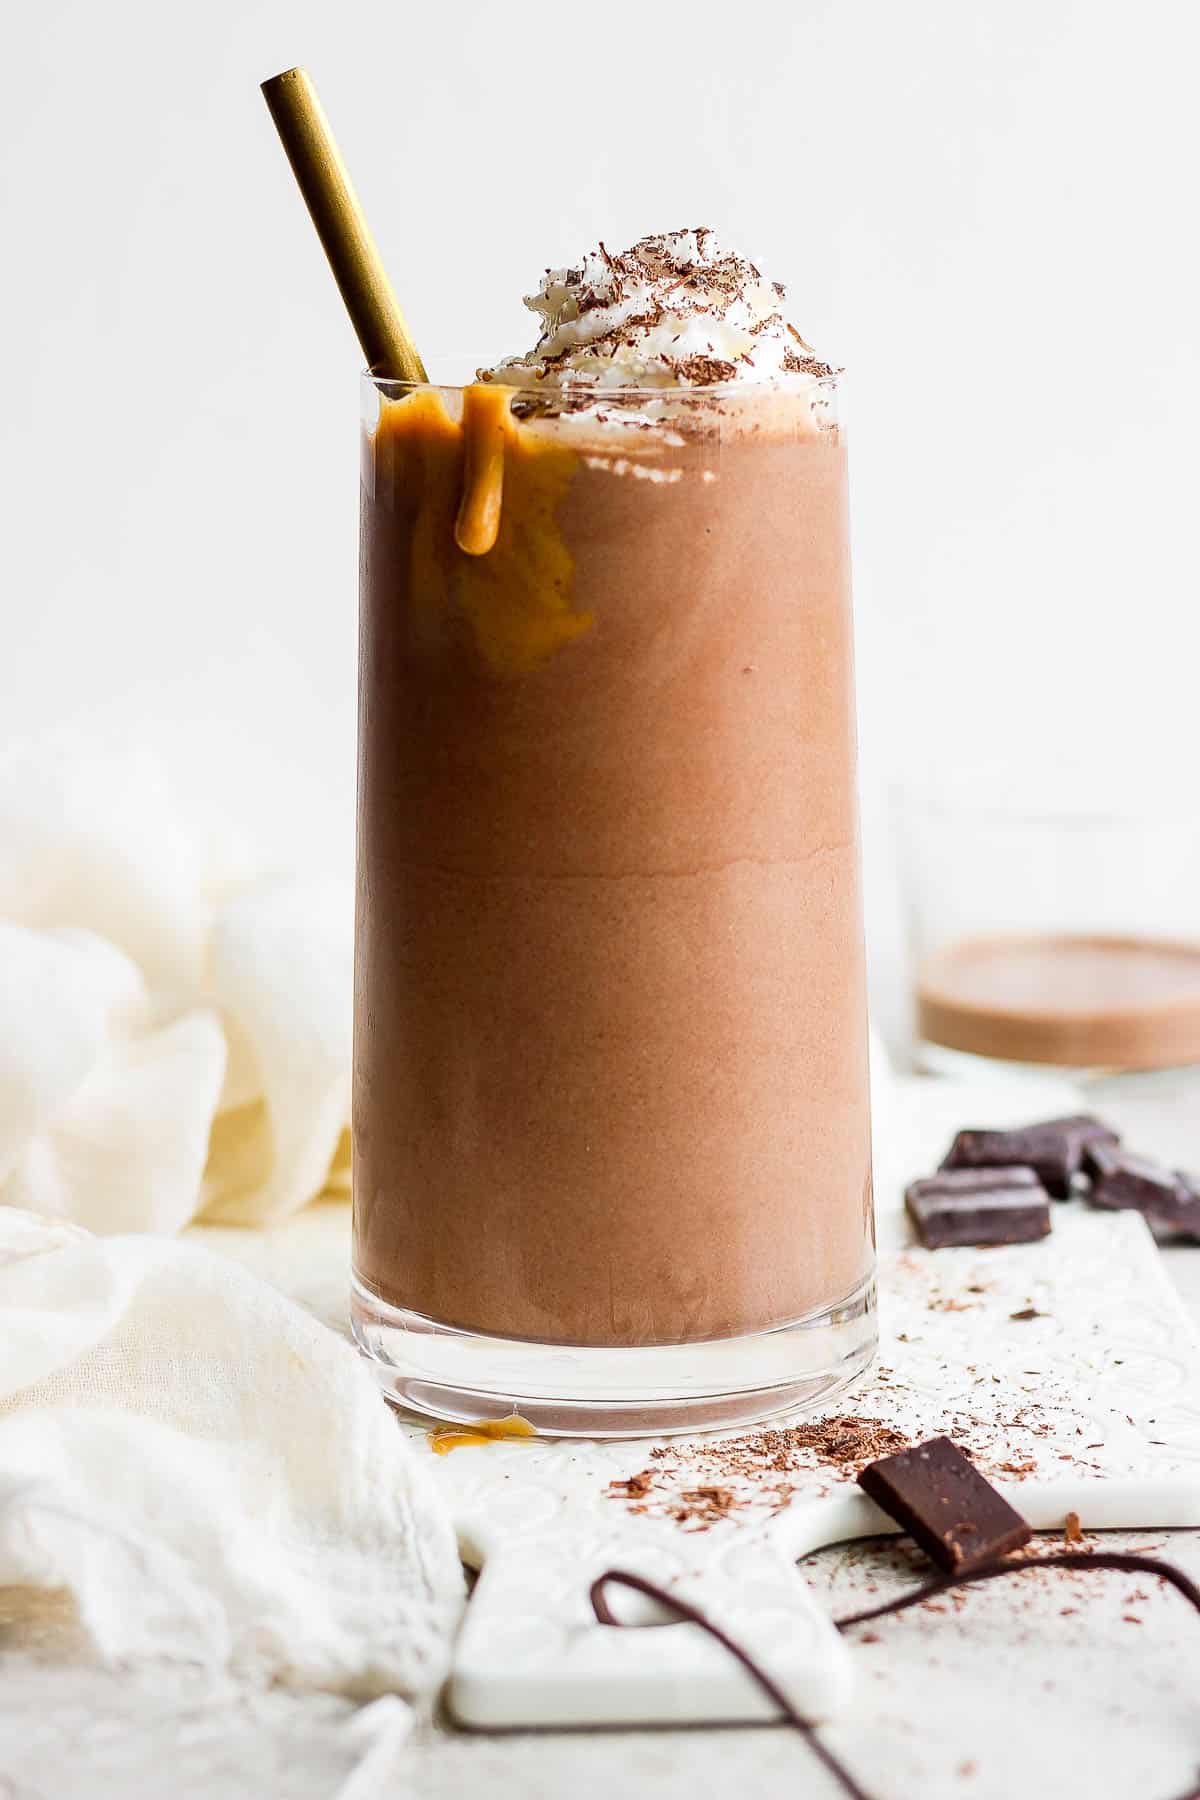 Chocolate protein shake in a glass topped with whipped cream and shaved chocolate with a golden straw.